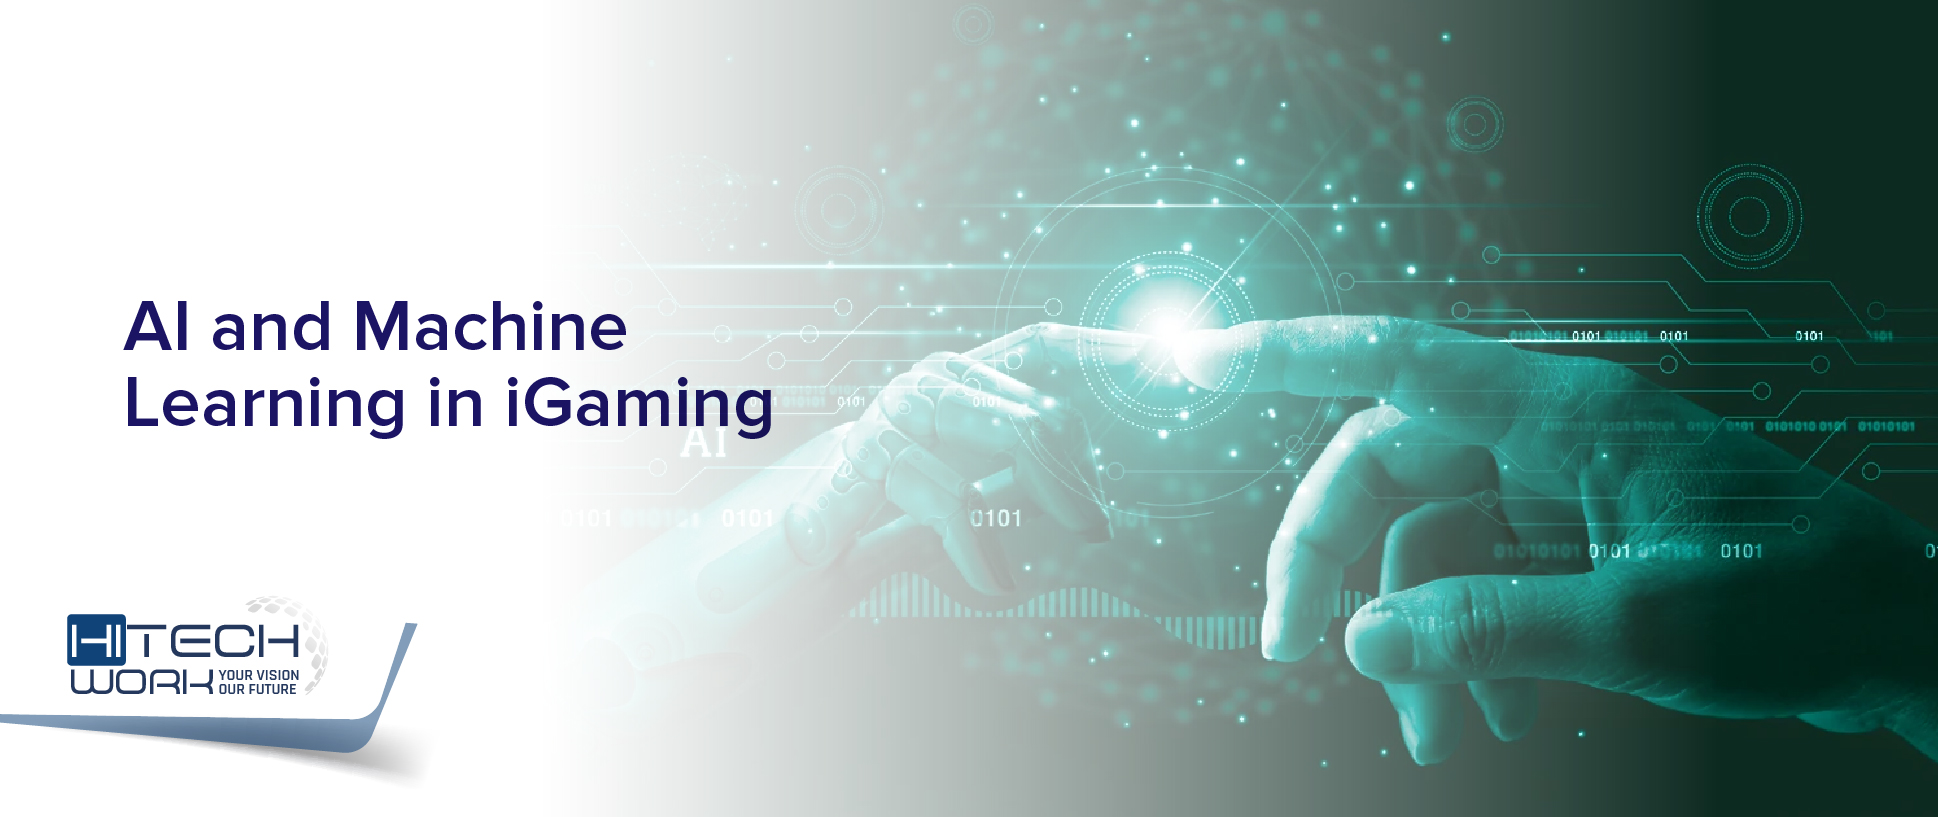 Learning in iGaming